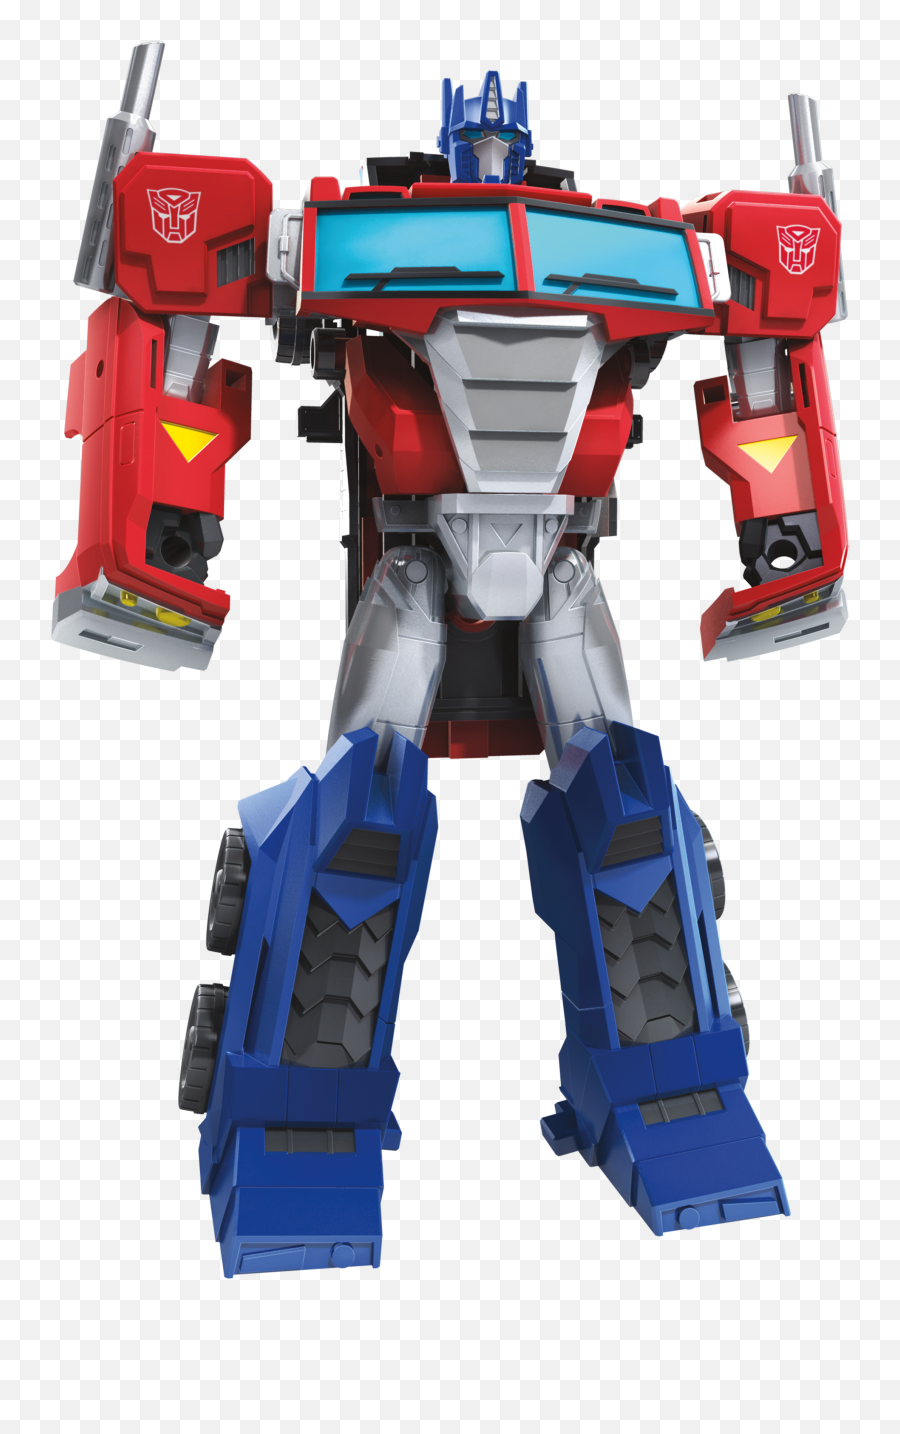 Nycc 2018 - Transformers Cyberverse Official Images Emoji,Optimus Prime Transparent